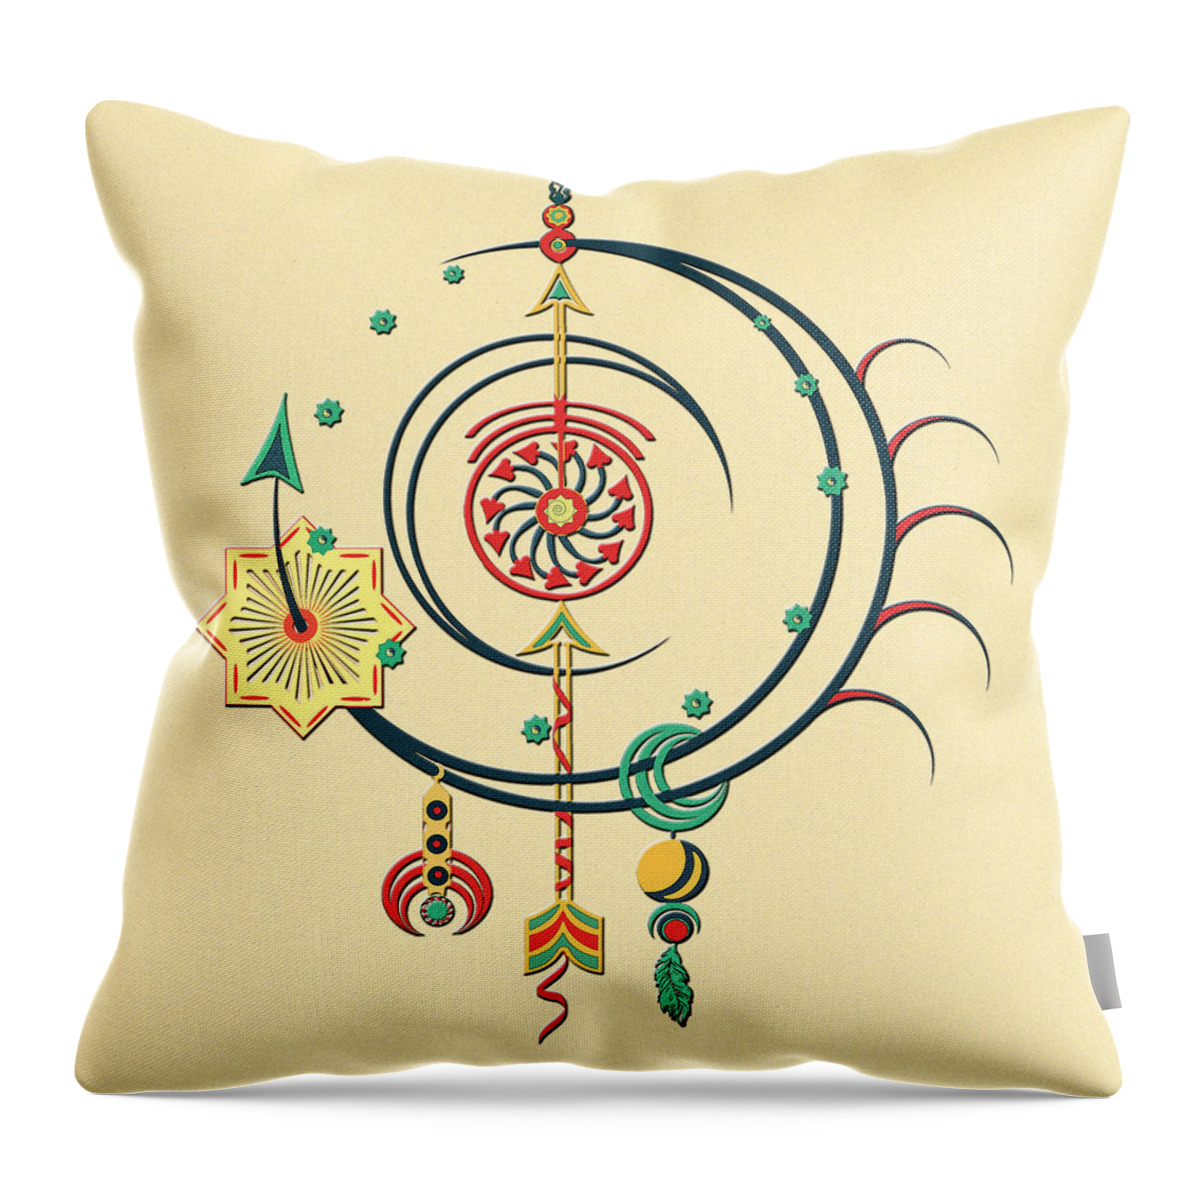 Multicolored Throw Pillow featuring the drawing Ornament Variation Three by Deborah Smith